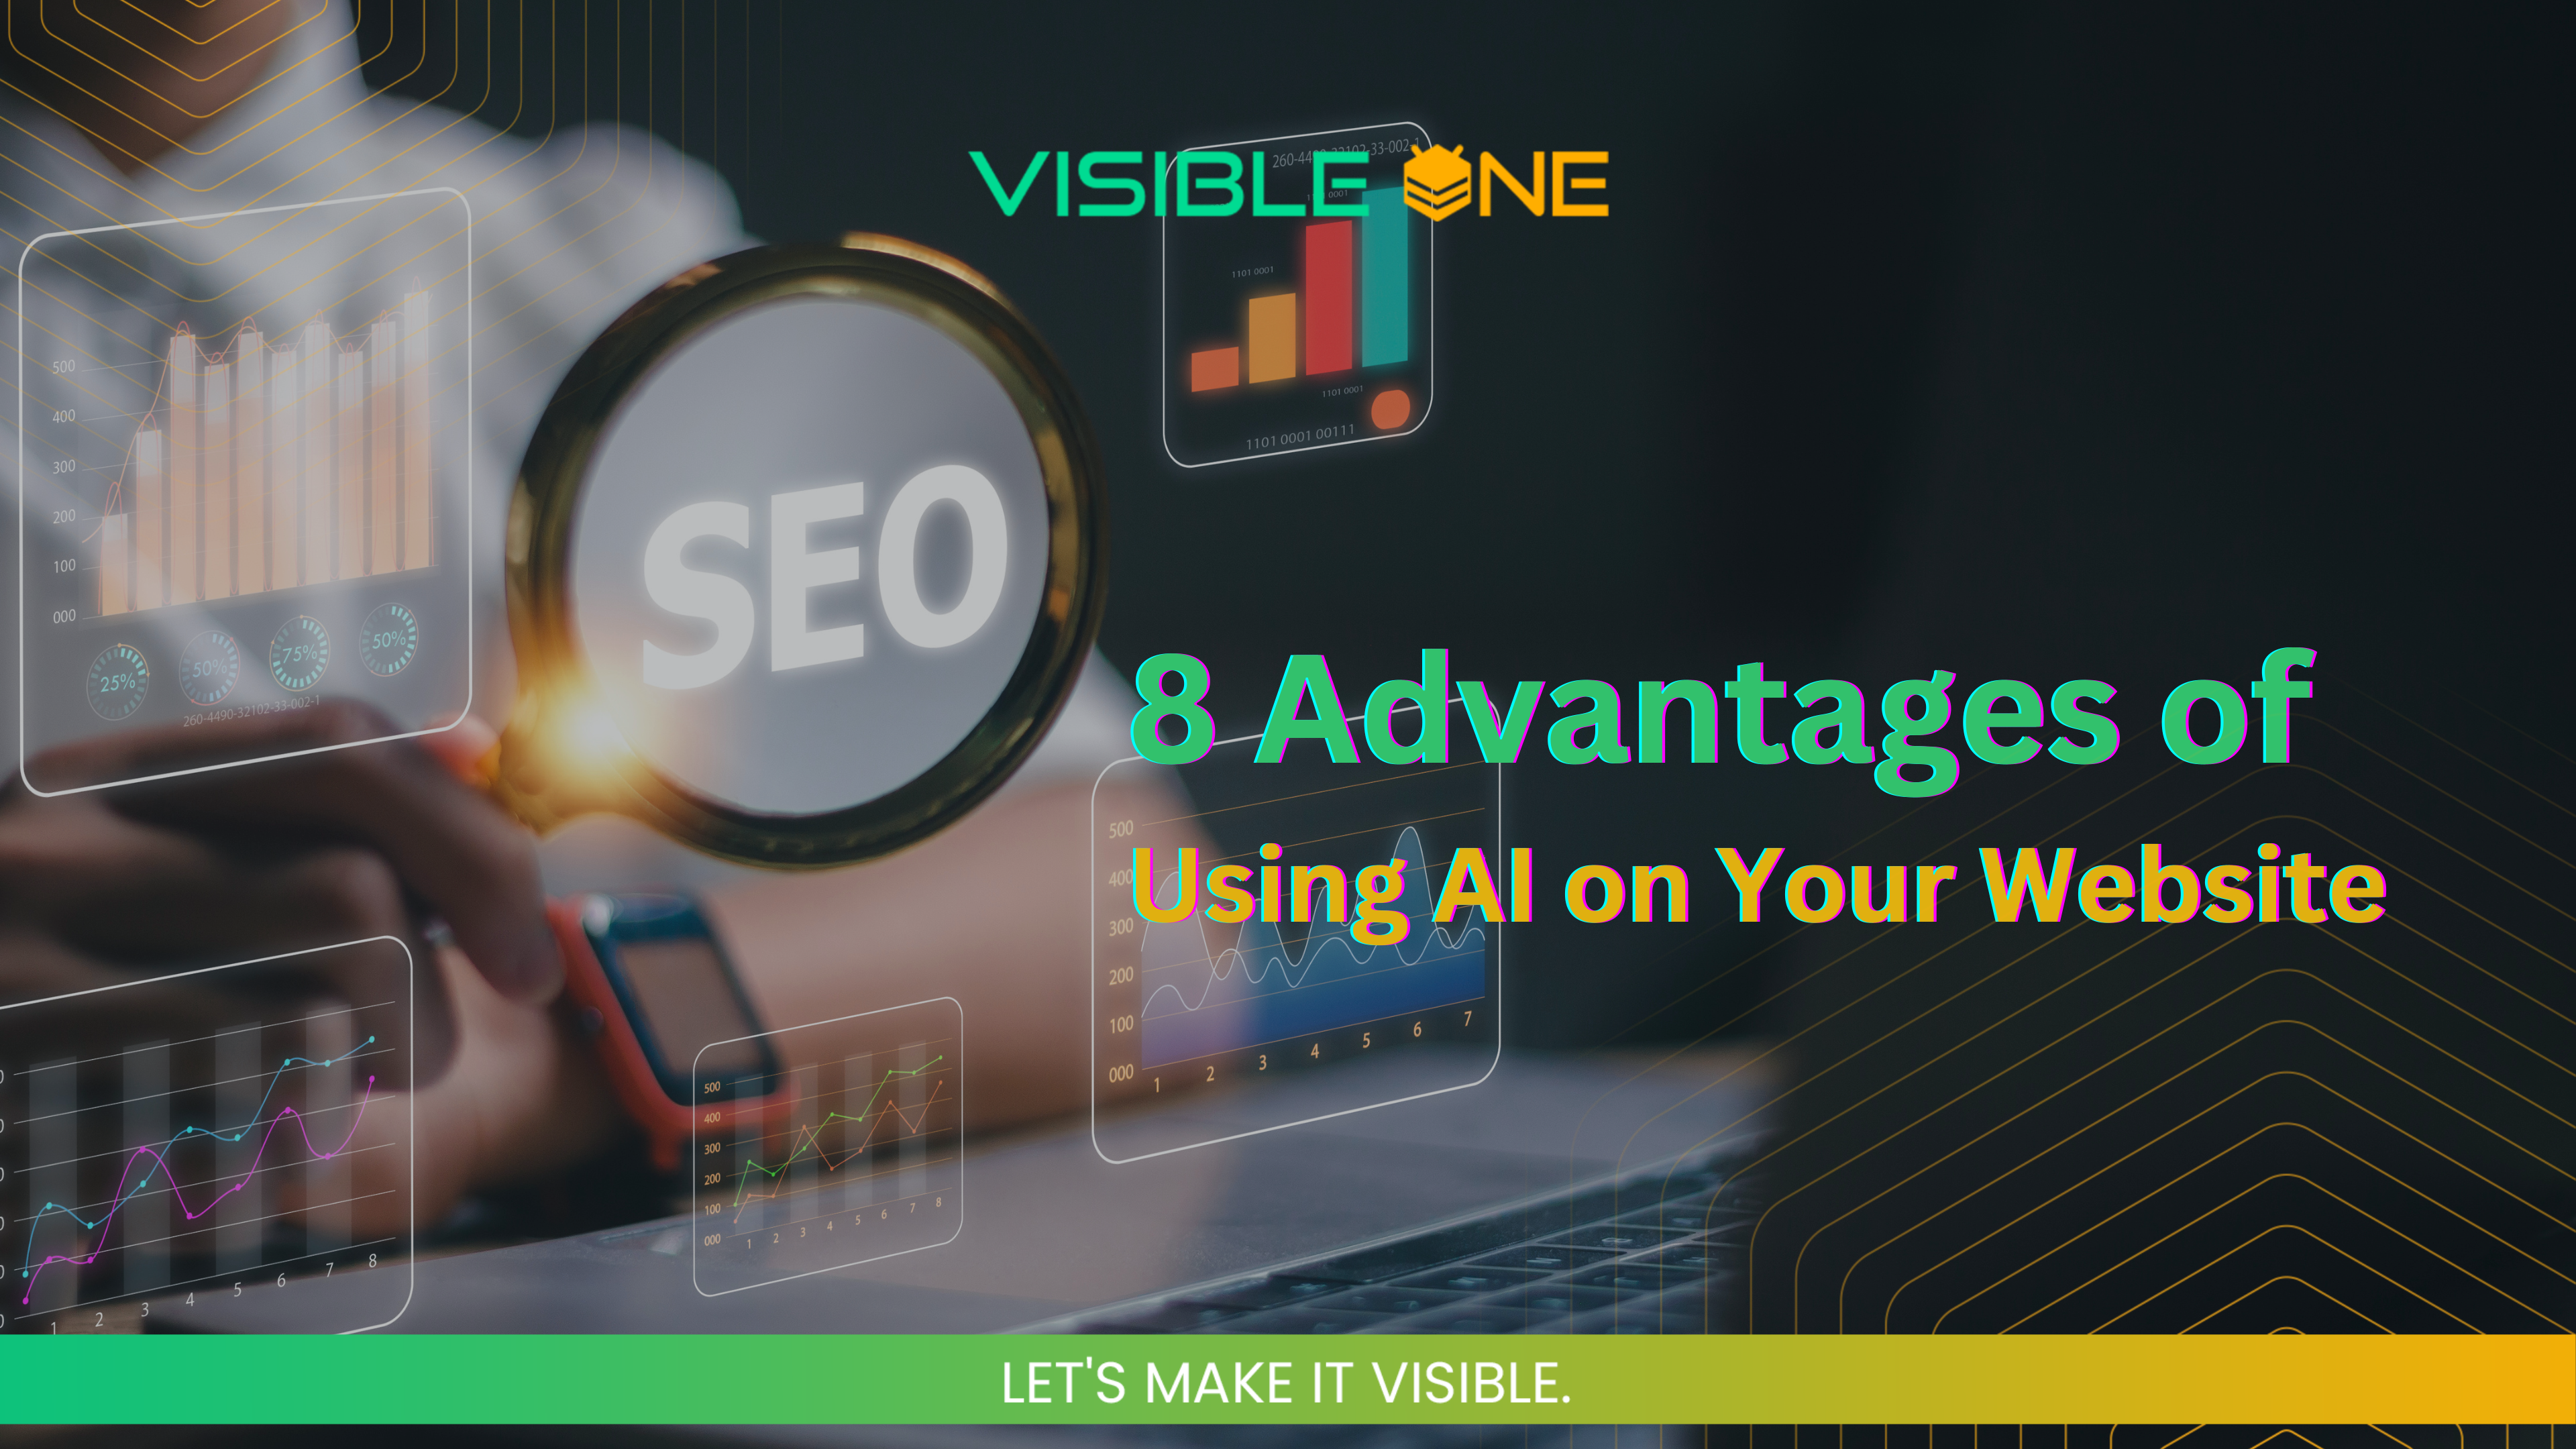 Graphic illustration showcasing 8 Advantages of Using AI for Enhancing SEO and Website Visibility